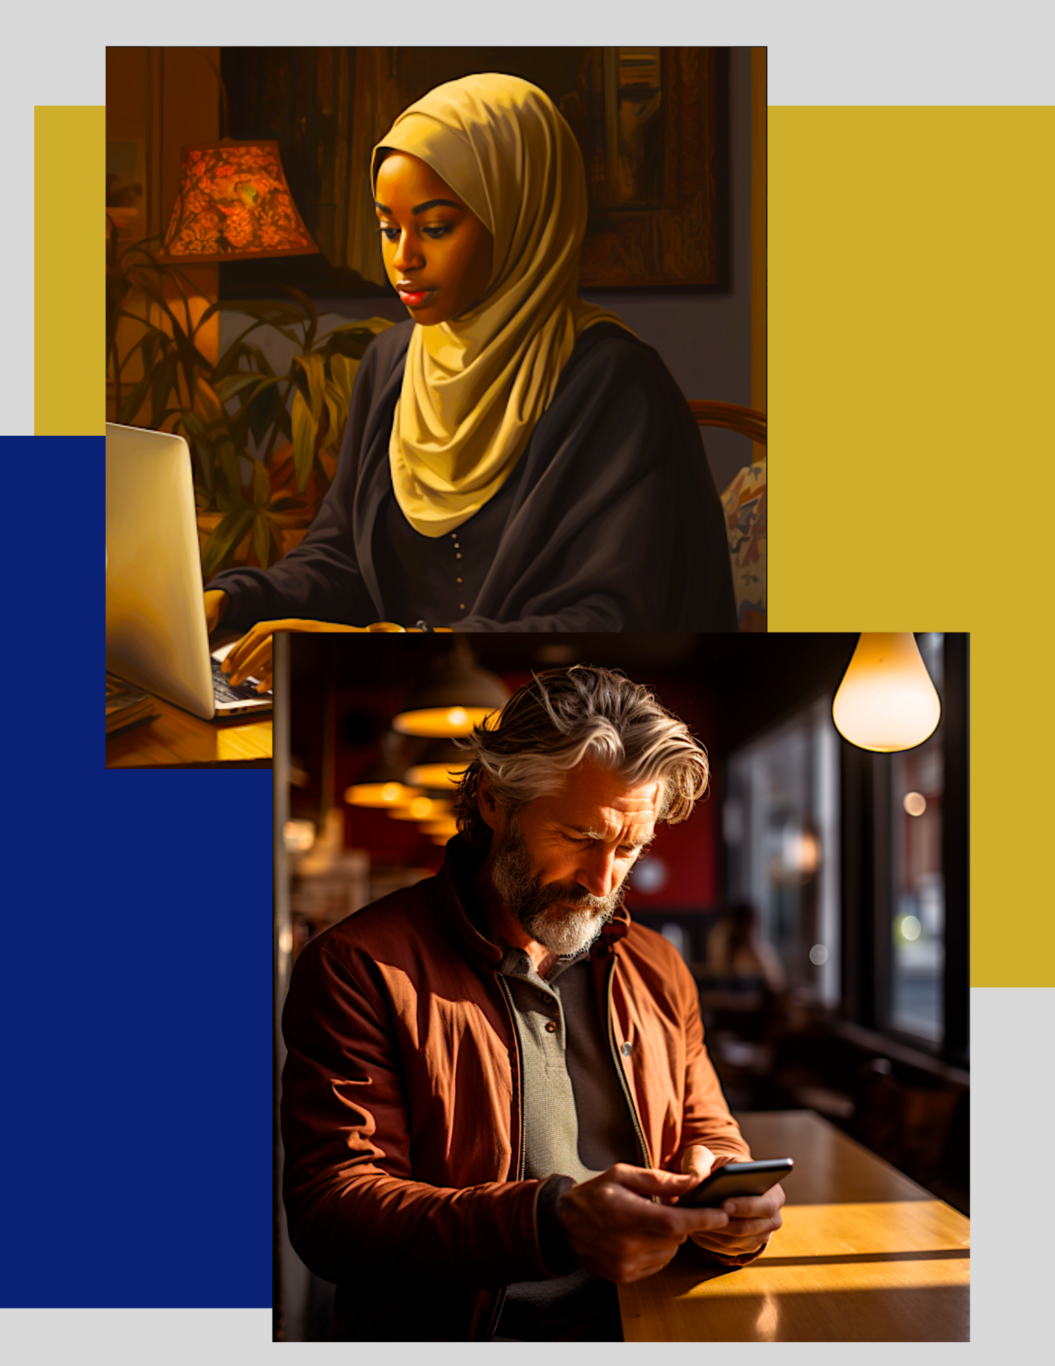 Image of a young black woman wearing hijab and typing on her computer and an image of a middle-age white man typing on his phone. Images produced using Midjourney.